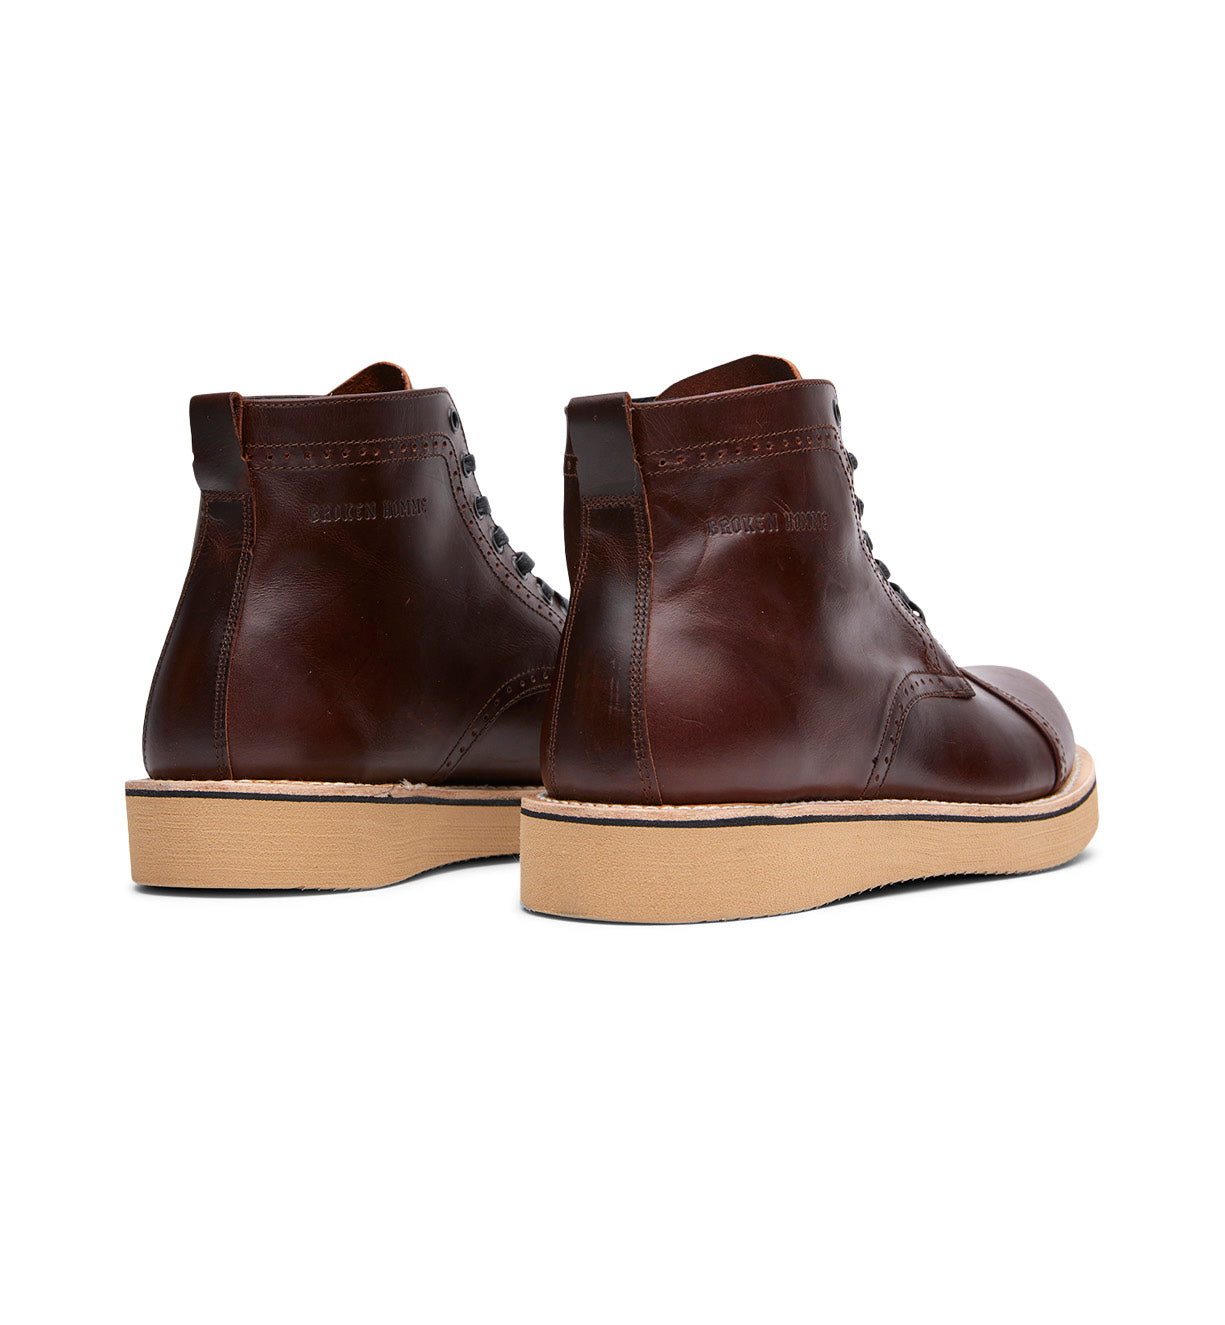 A pair of Shaun brown leather boots with a rubber sole from Broken Homme.